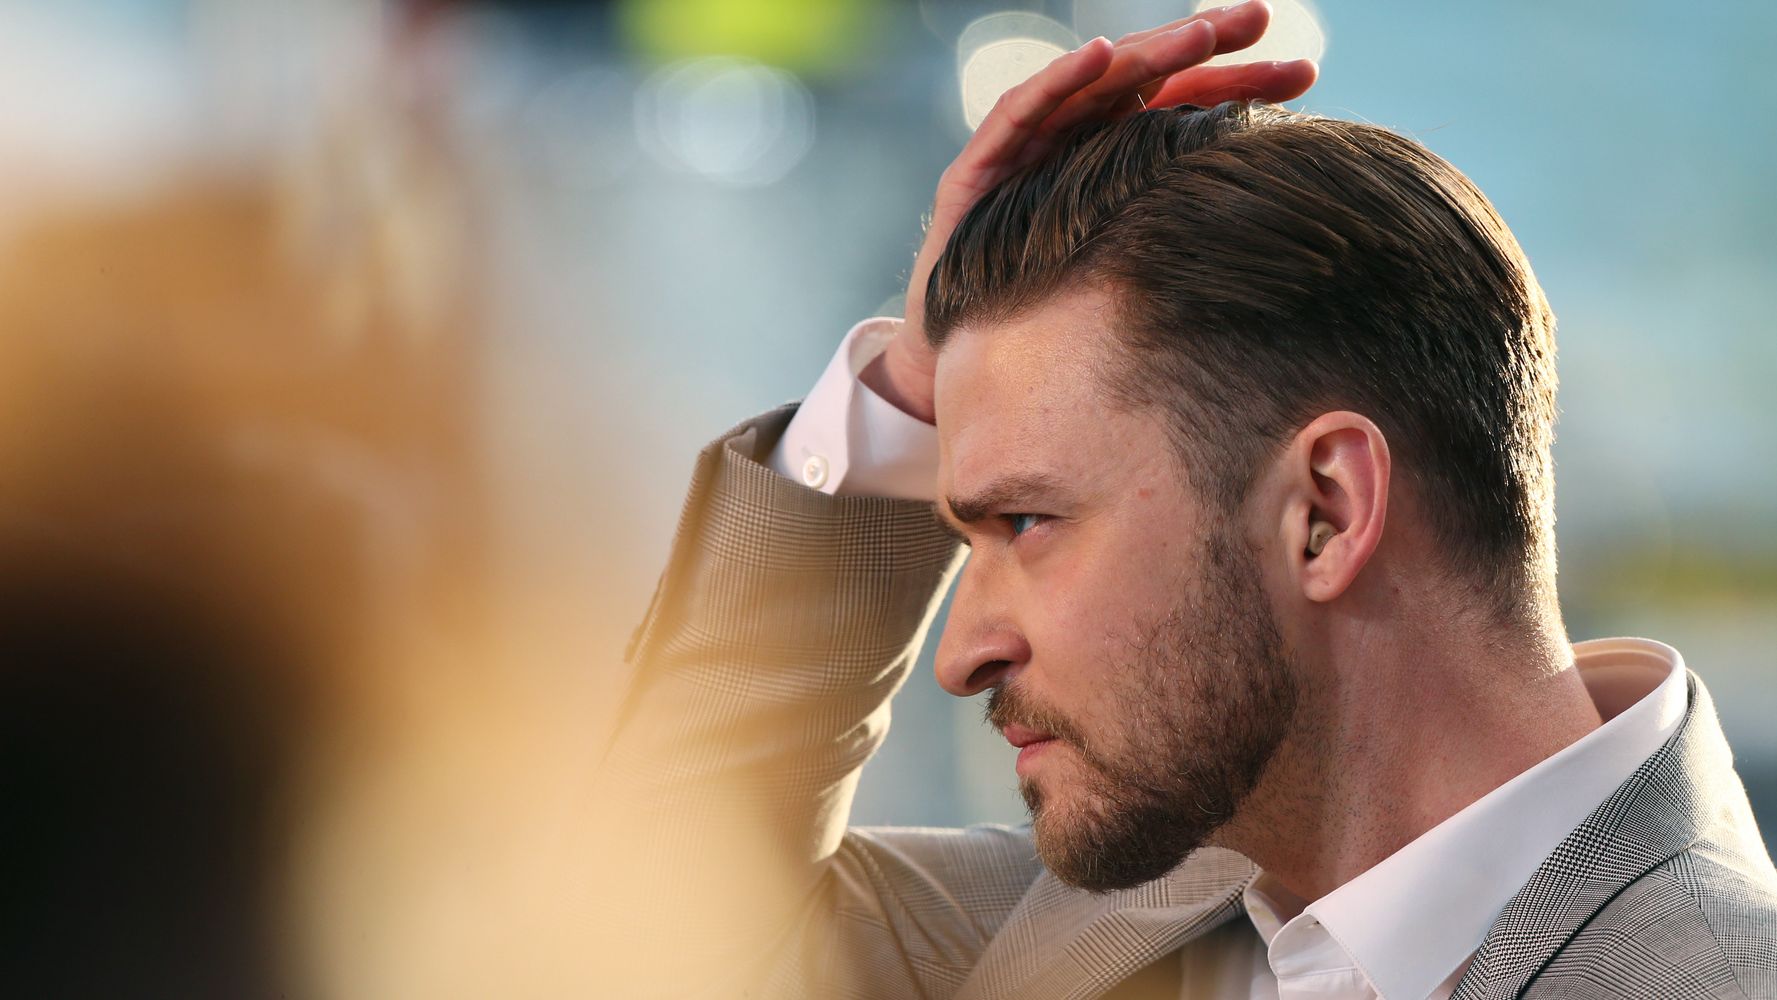 Show These Short Men S Hairstyles To Your Barber Huffpost Life